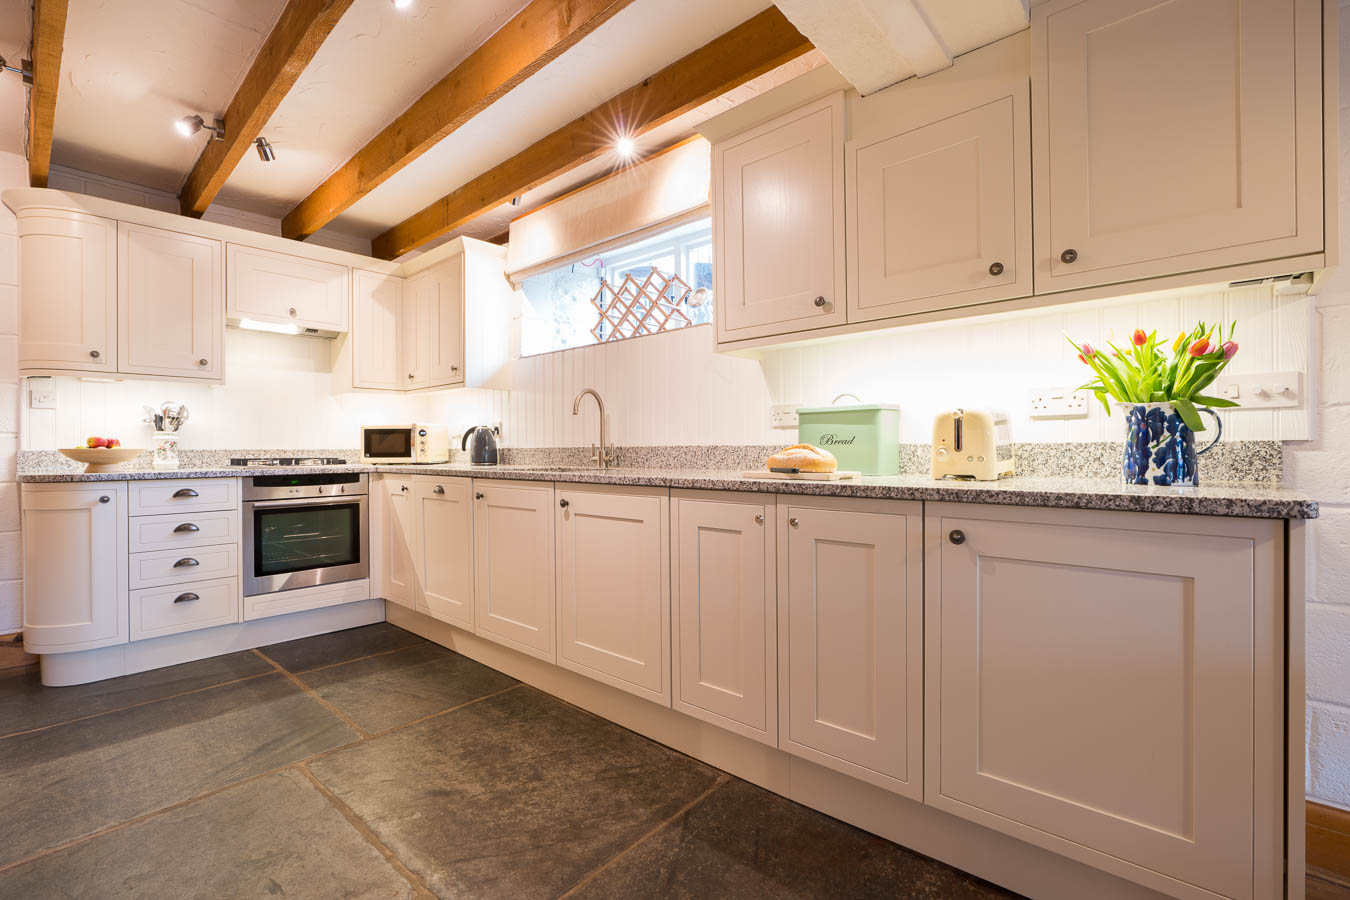 The fresh cream kitchen with granite work tops, Neff oven and original sate floors of Quarry cottage at Flear Farm. 